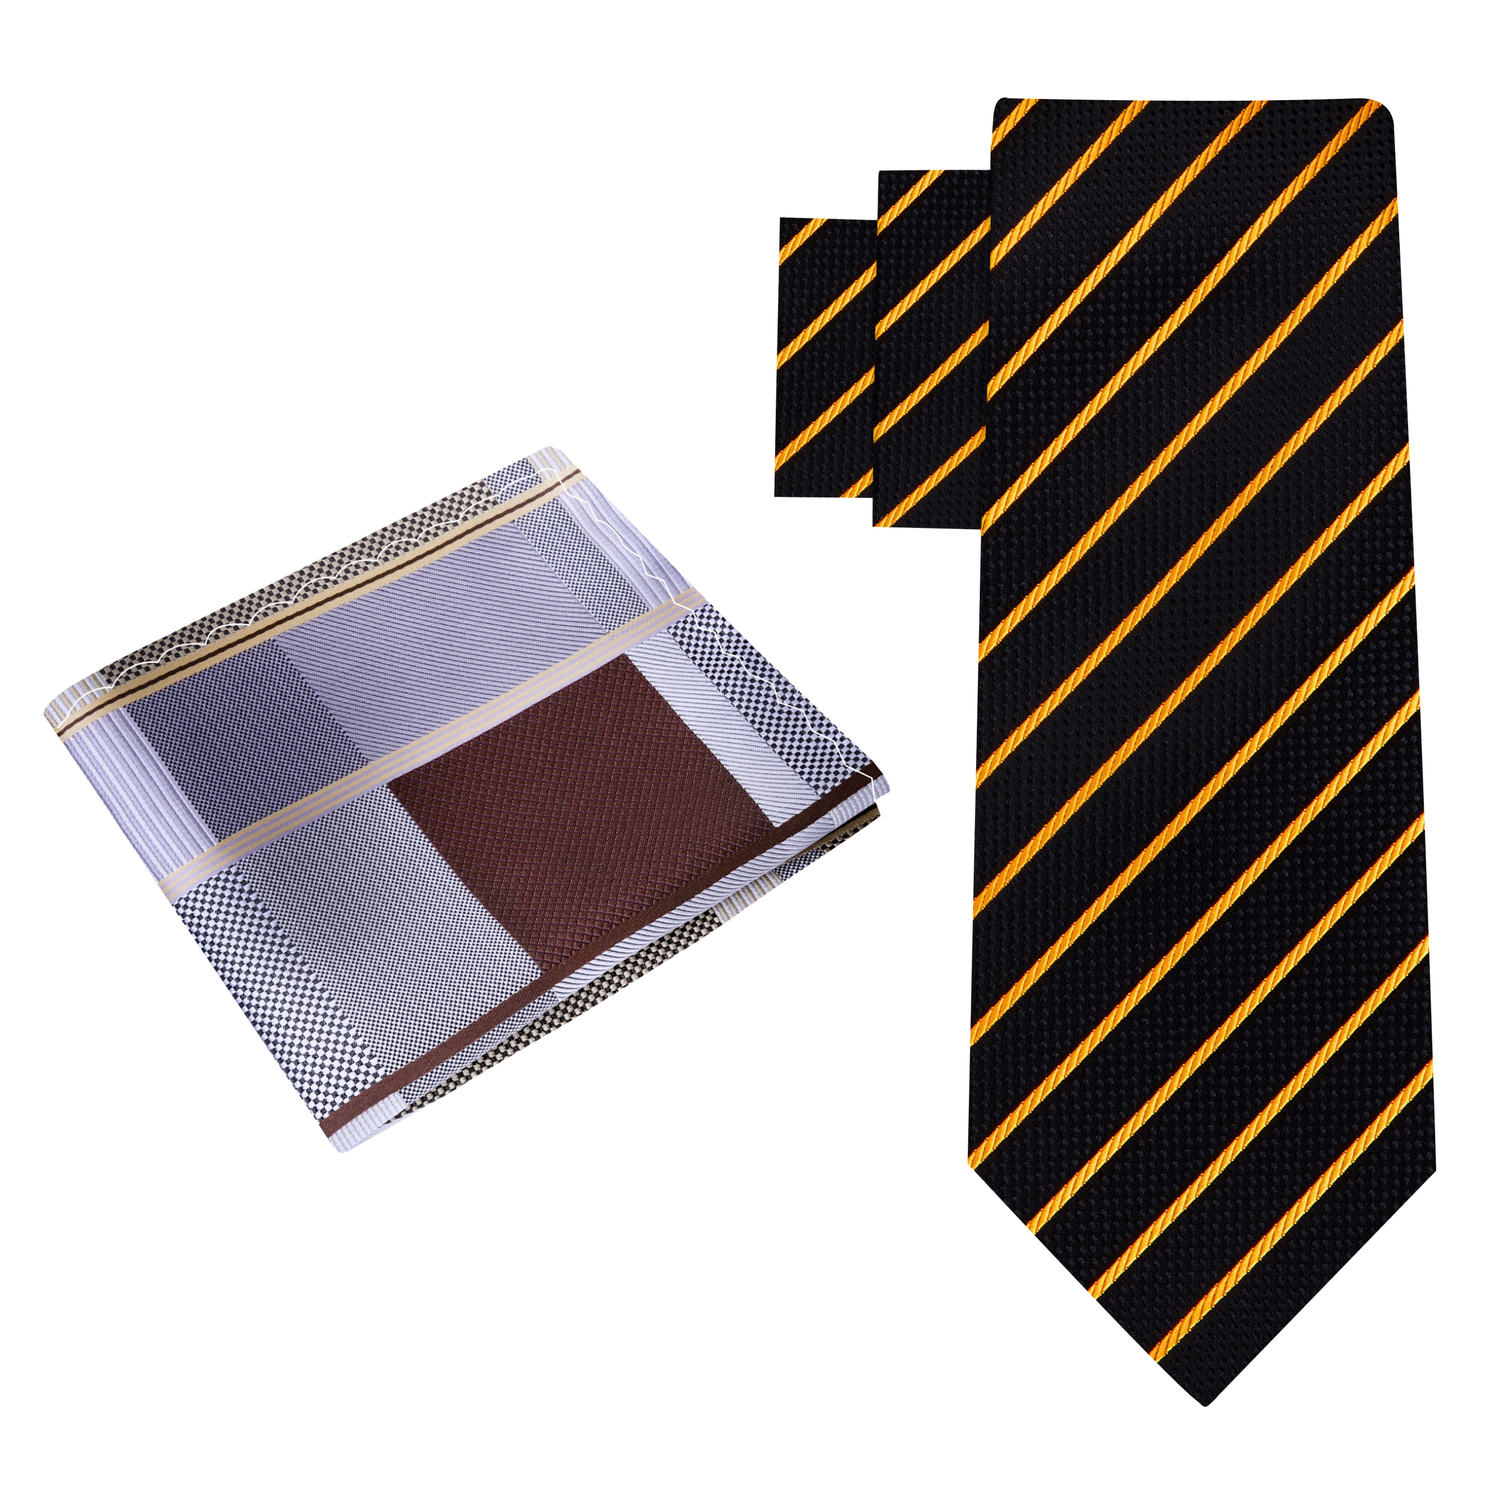 Alt View: Black, Gold Stripe Necktie and Accenting Square